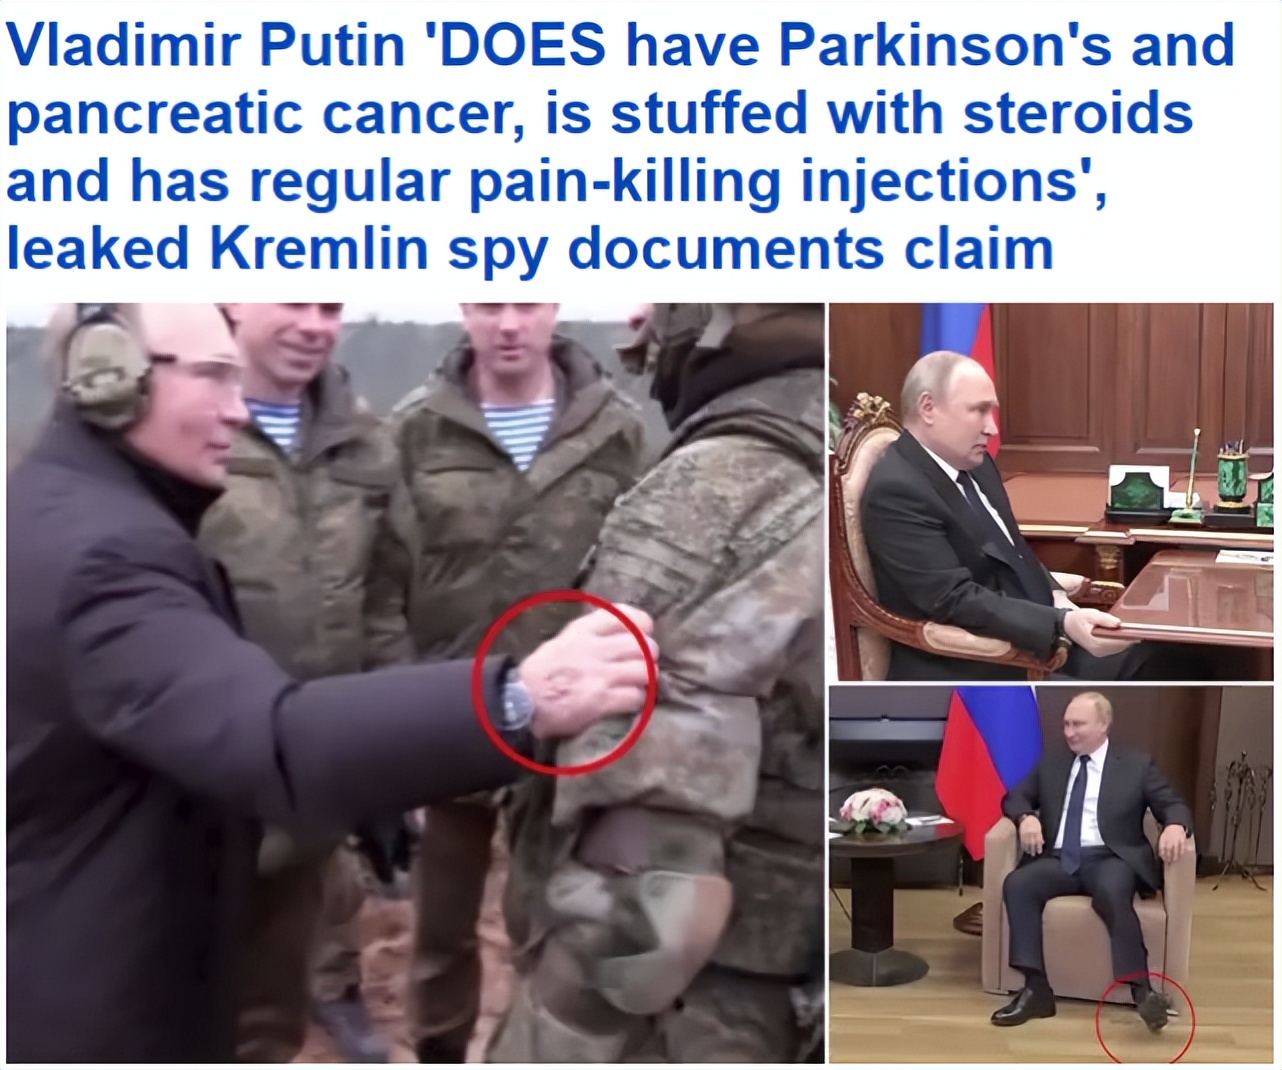 British Media Putin Suffers From Two Diseases Parkinsons And